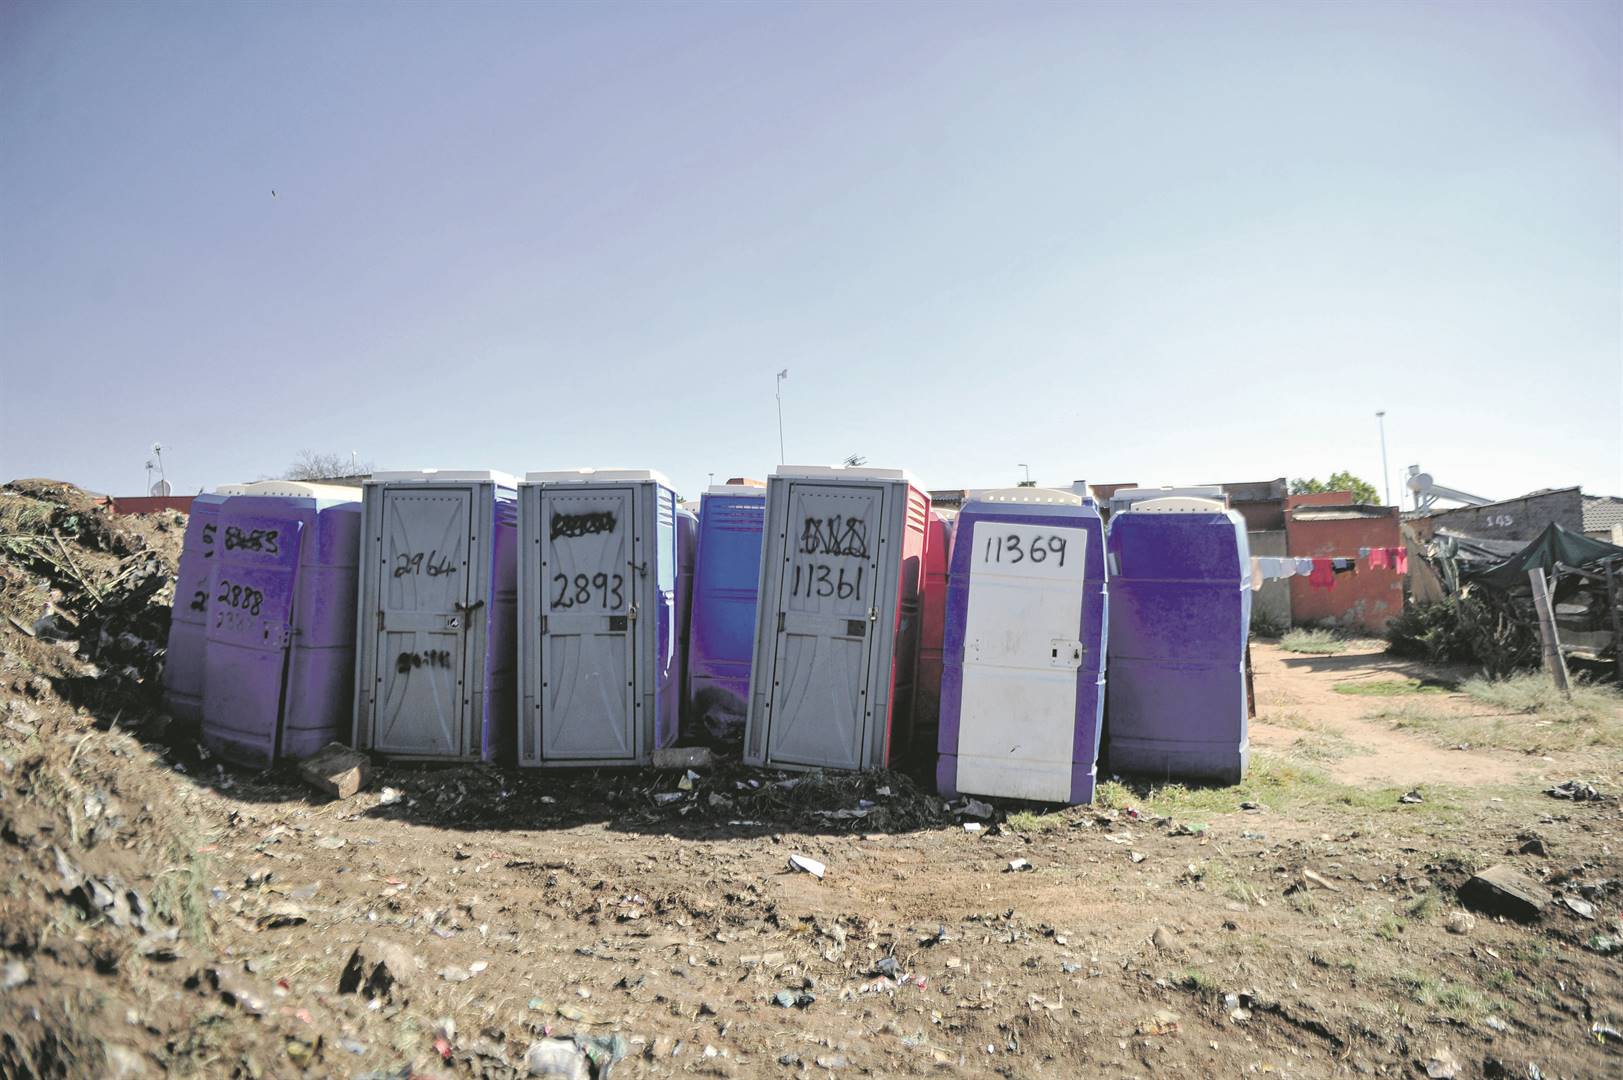 News24 | WATCH | ANC failed voters on service delivery, but ‘better the devil you know’